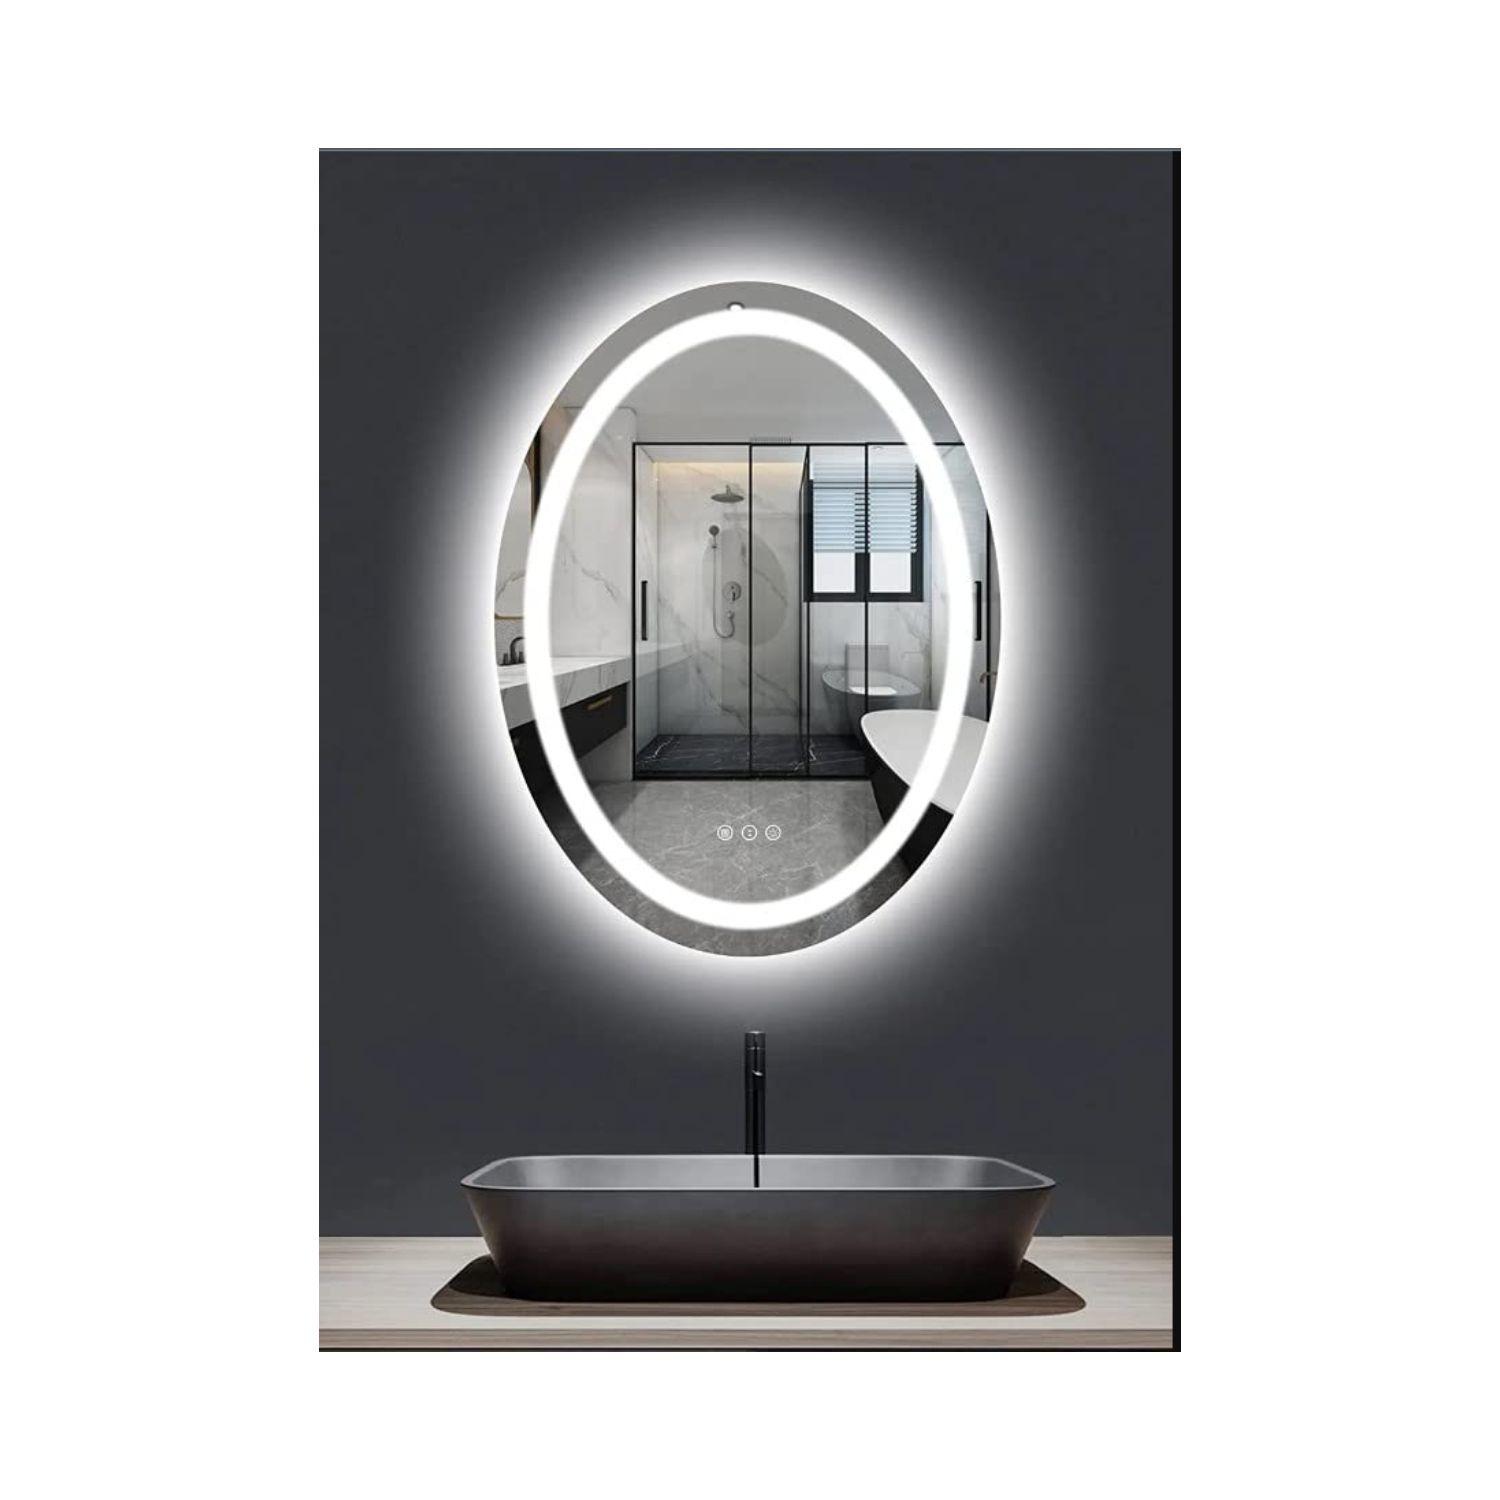 VENETIAN IMAGE Oval LED Vanity Bathroom Mirror with Front and Backlit, Dimmable Makeup Mirrors for Wall, Anti-Fog, Water & Termite Proof